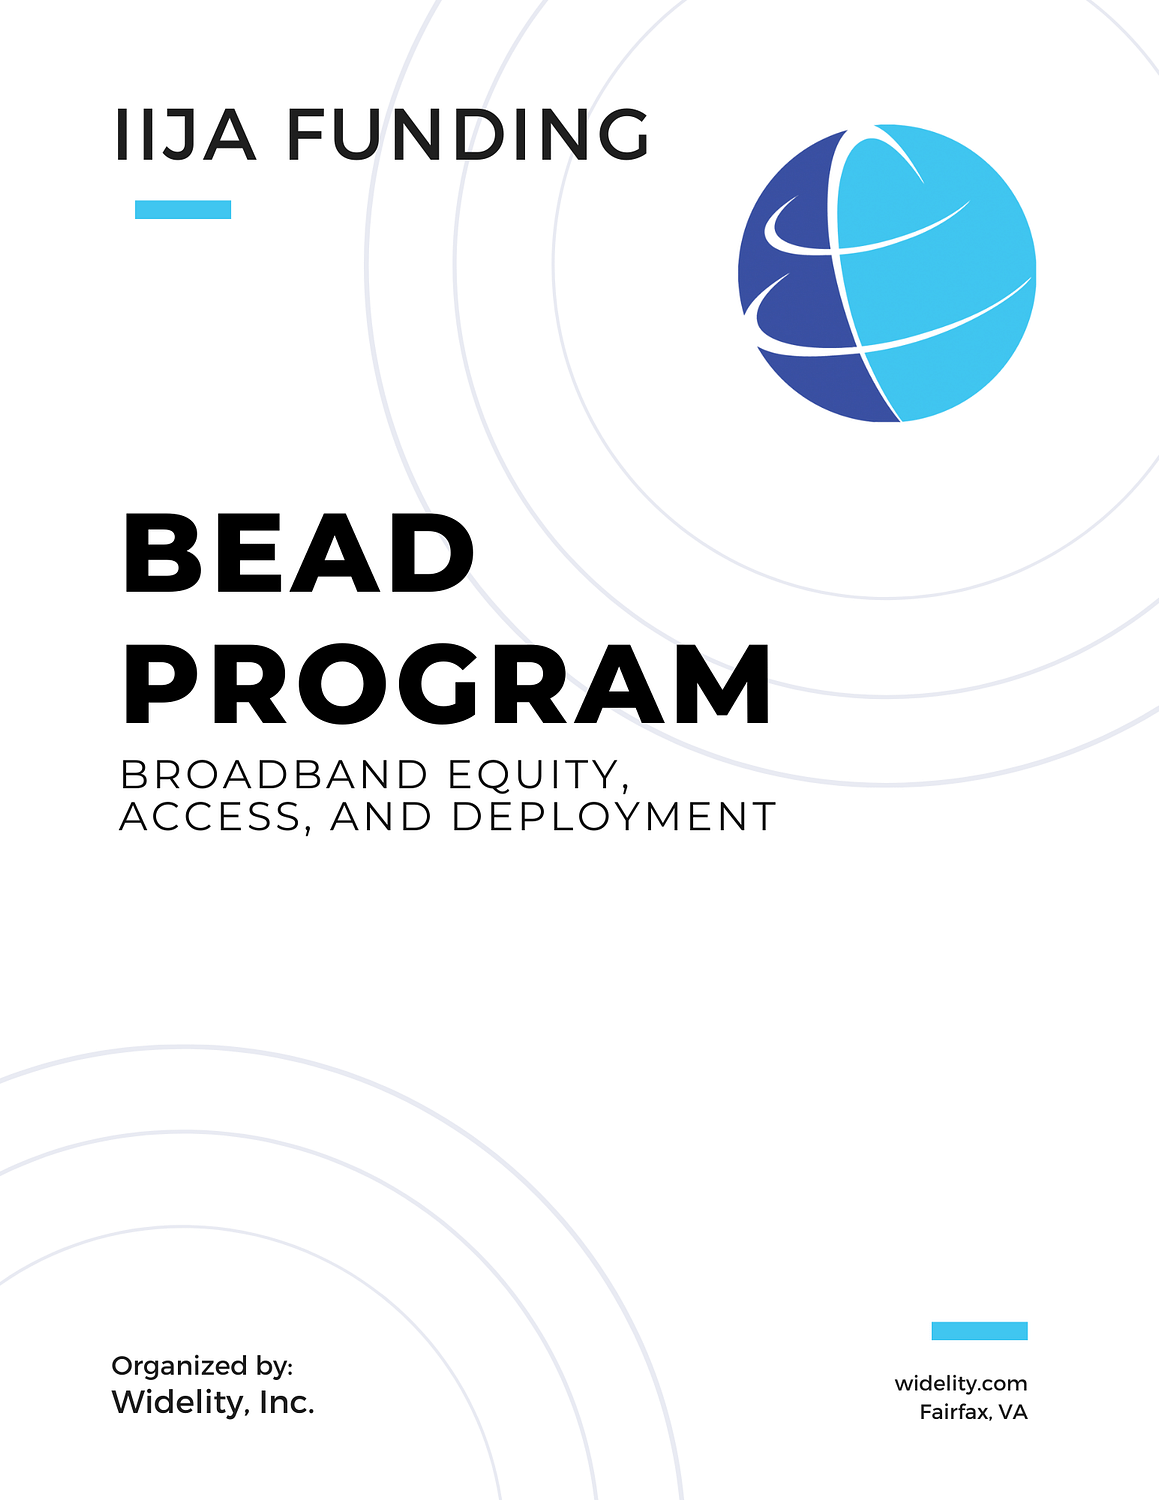 BEAD Broadband Equity and Access Development Program Information PDF: Click to download